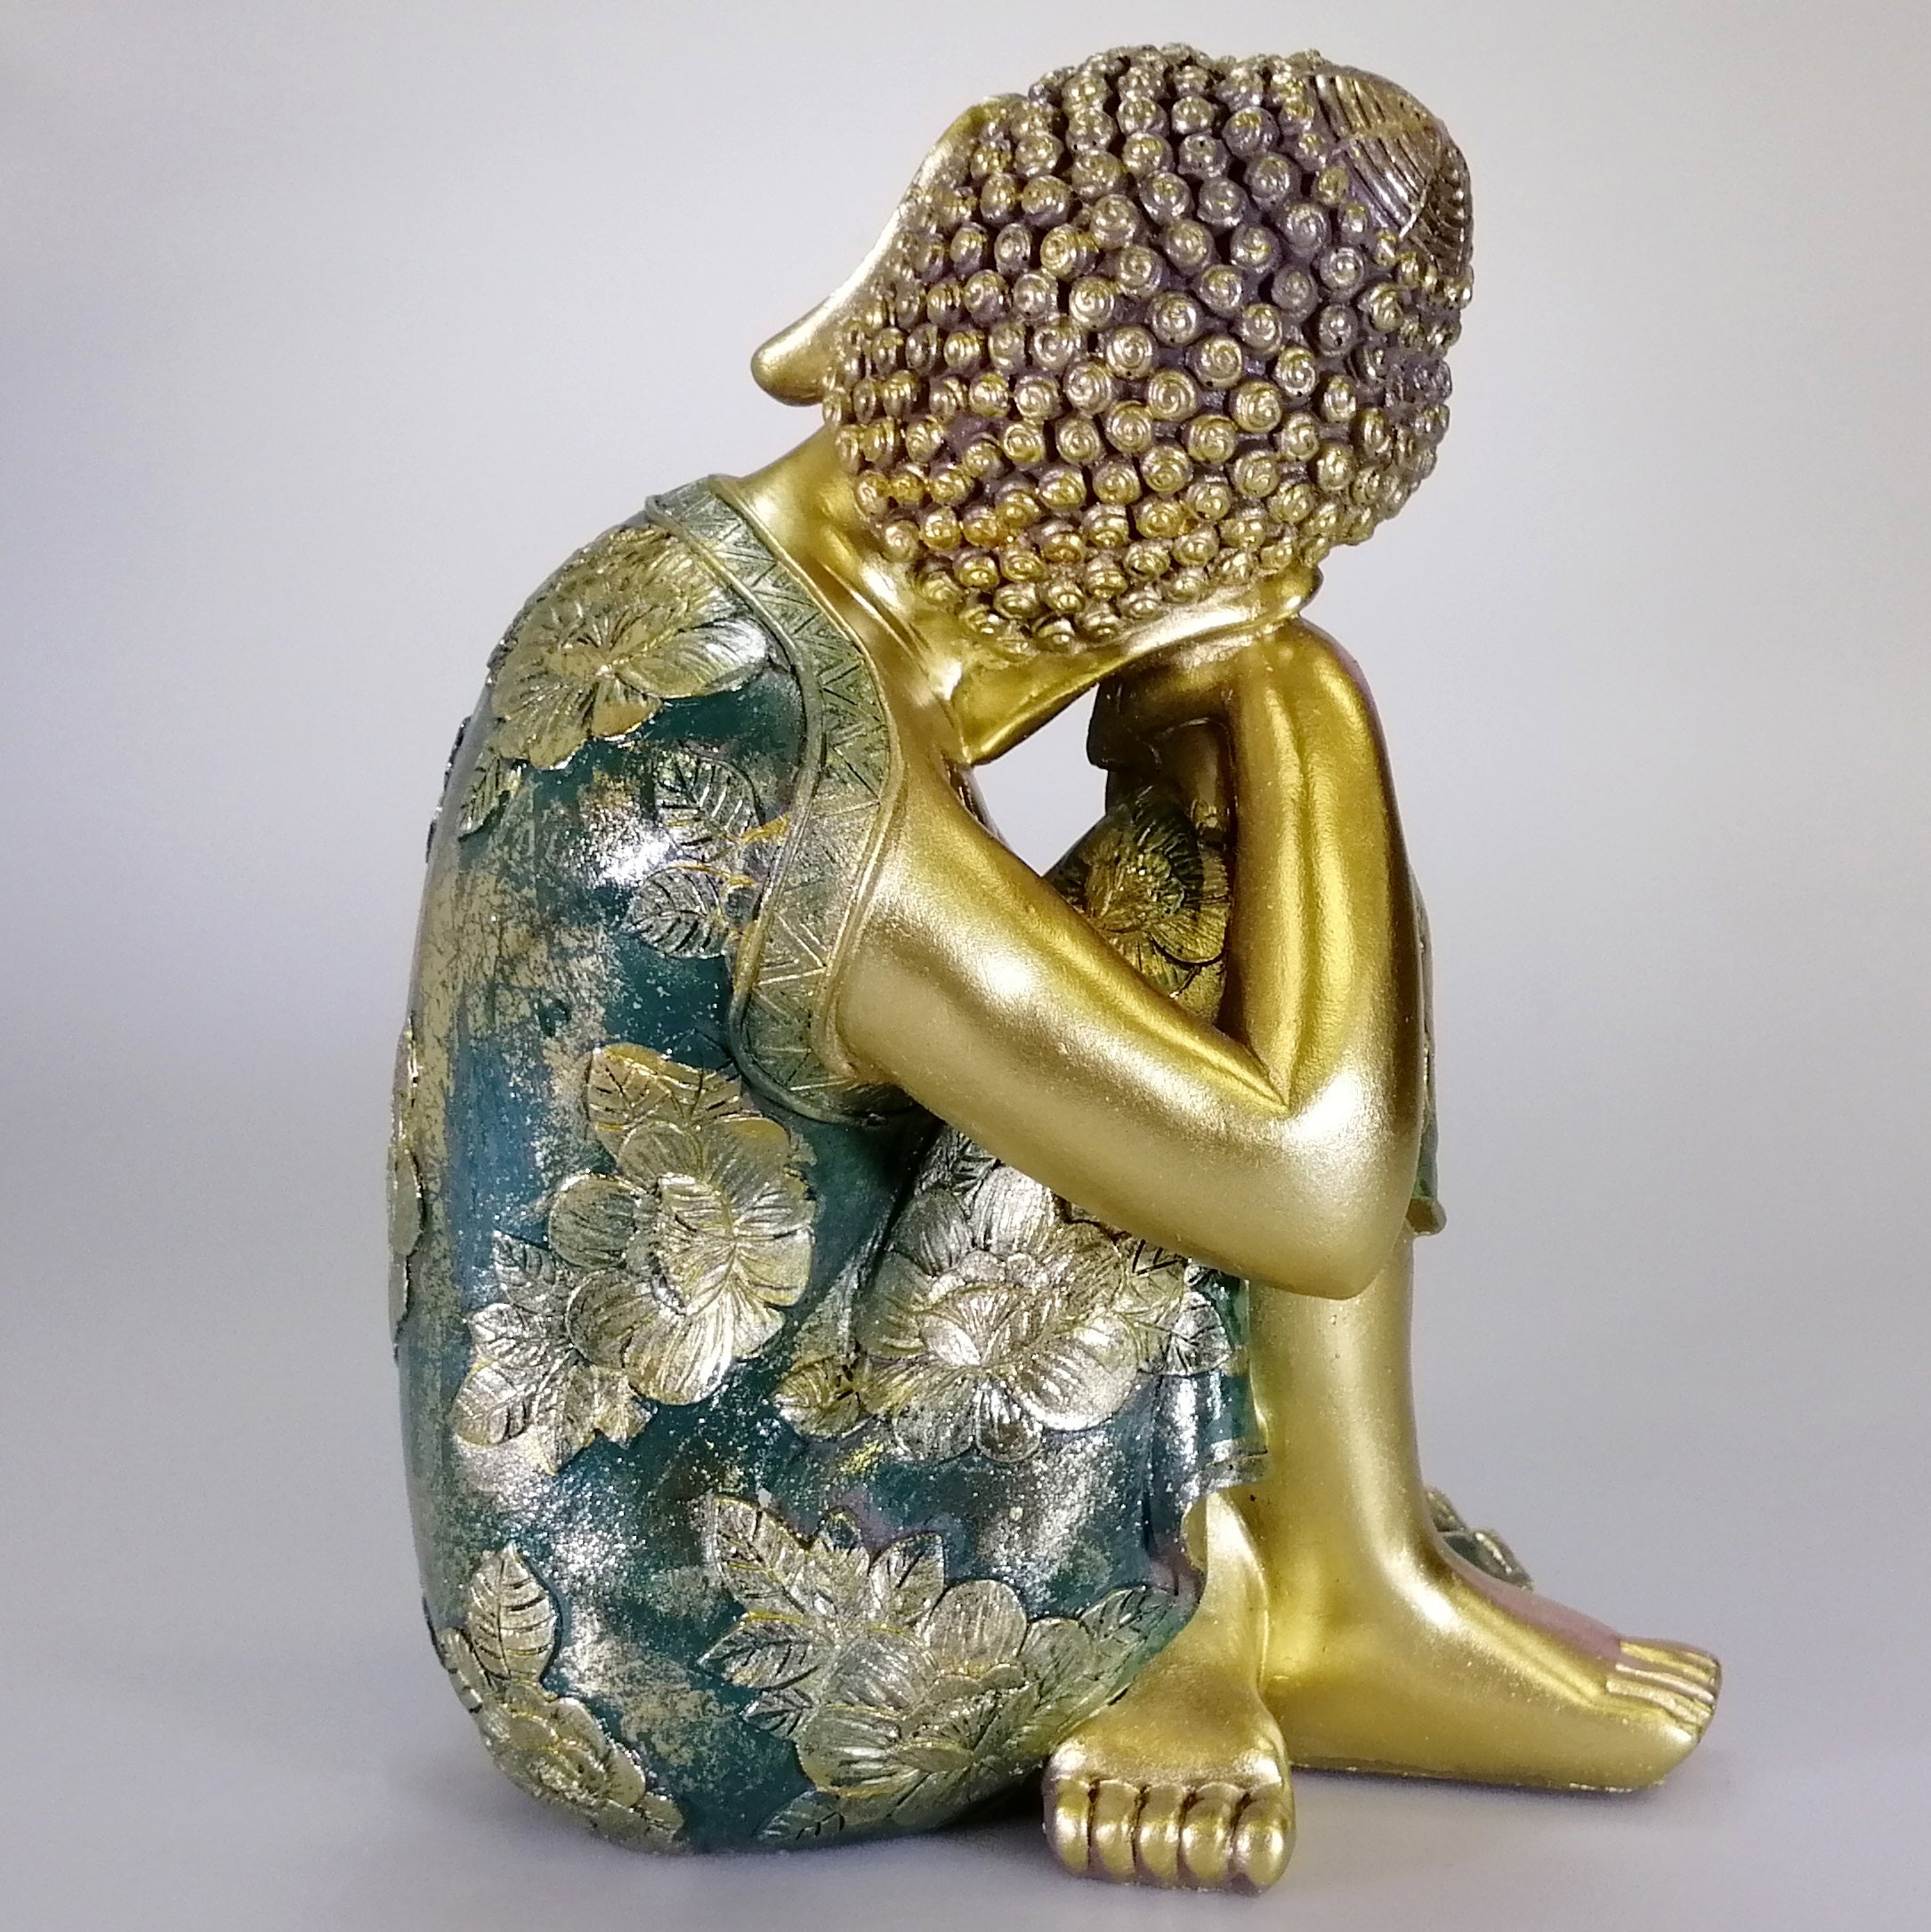 Buddha Figure - Painted Green and Gold - Tealight Holder